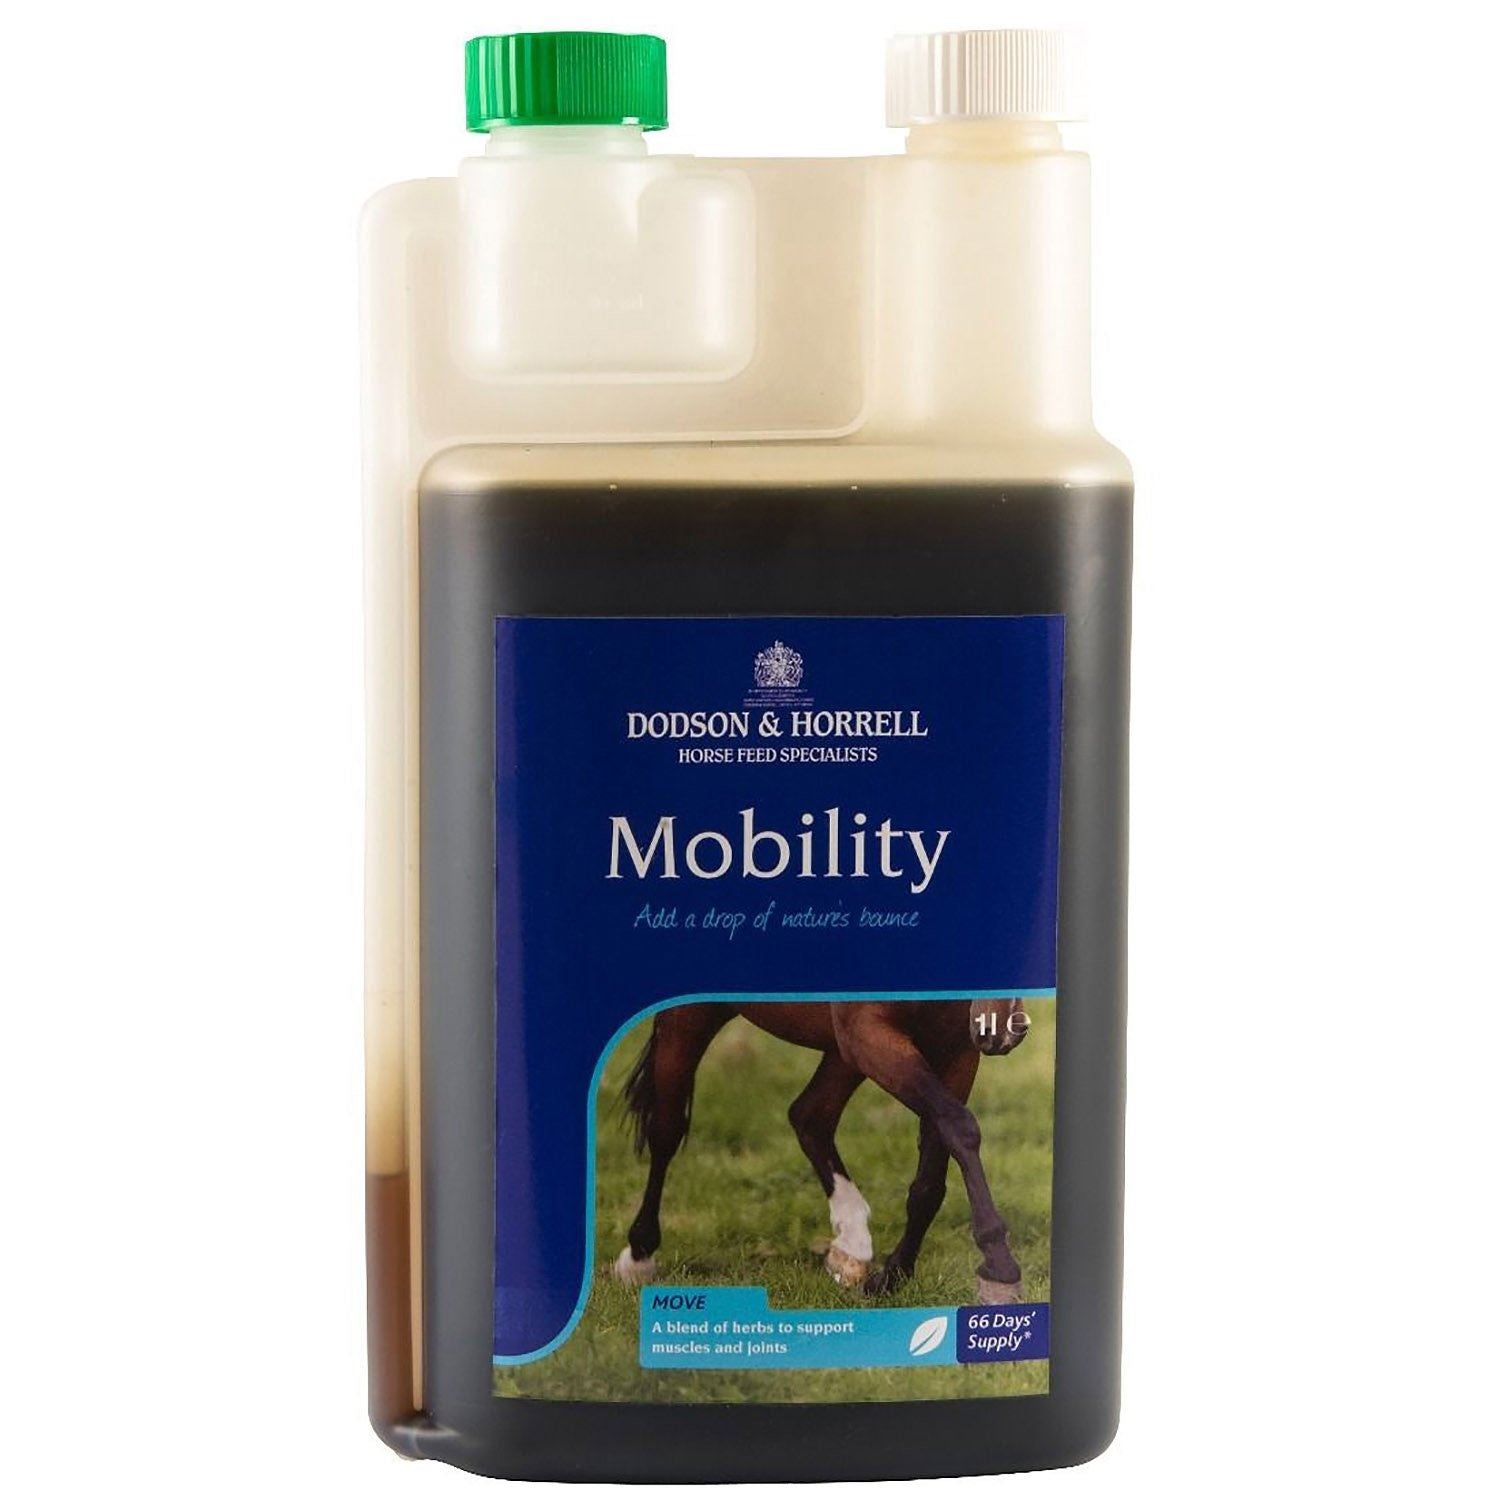 Dodson & Horrell Mobility Liquid - Just Horse Riders